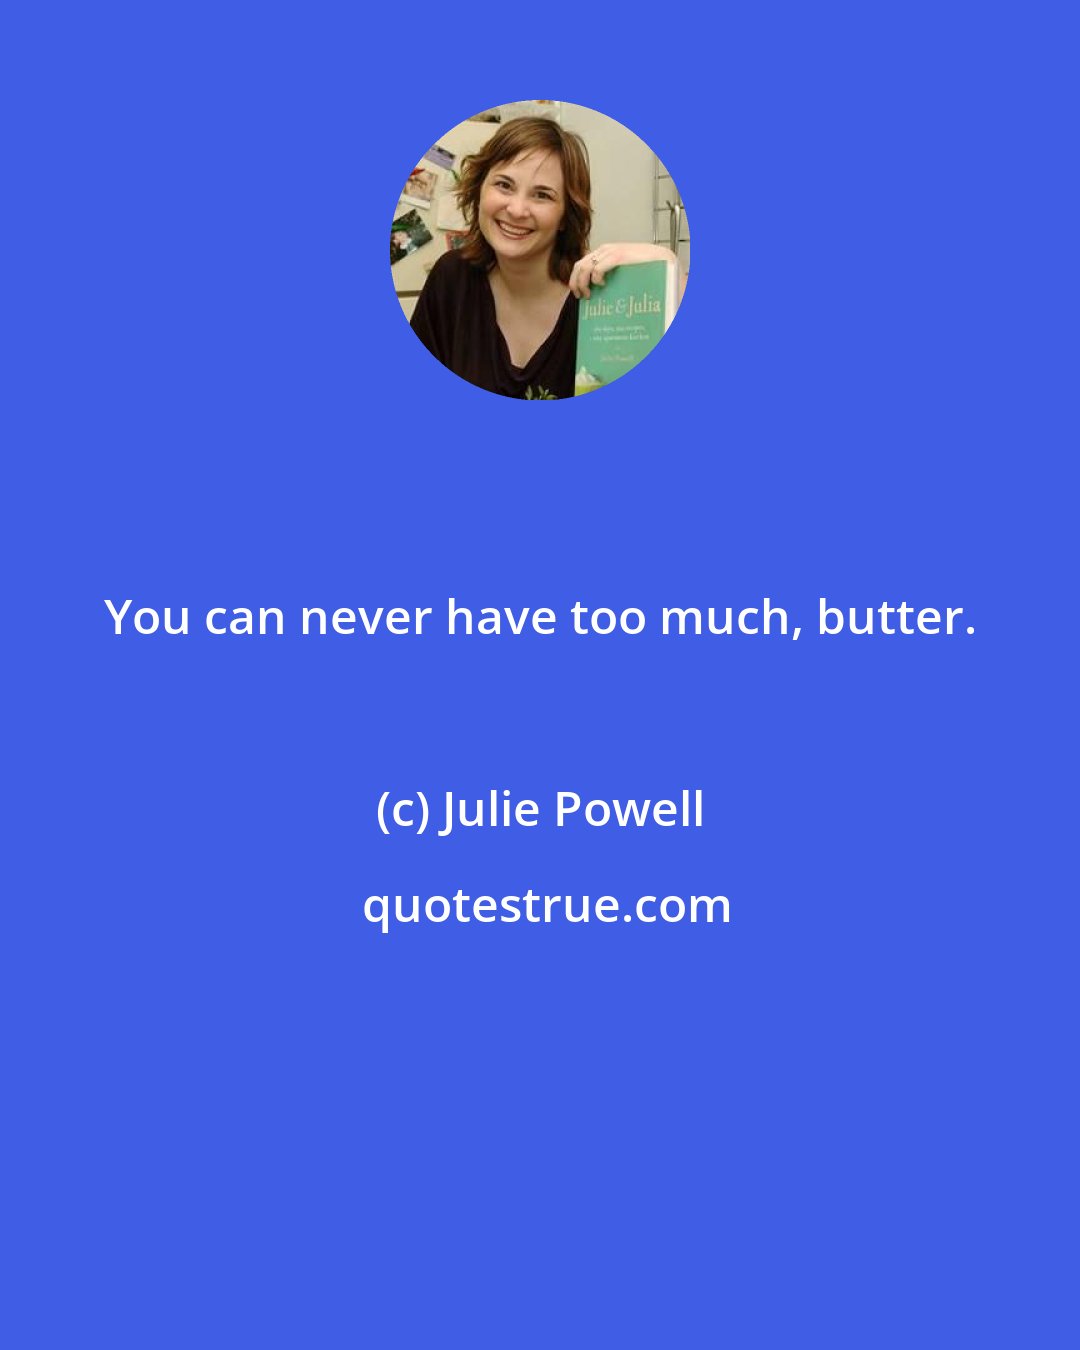 Julie Powell: You can never have too much, butter.